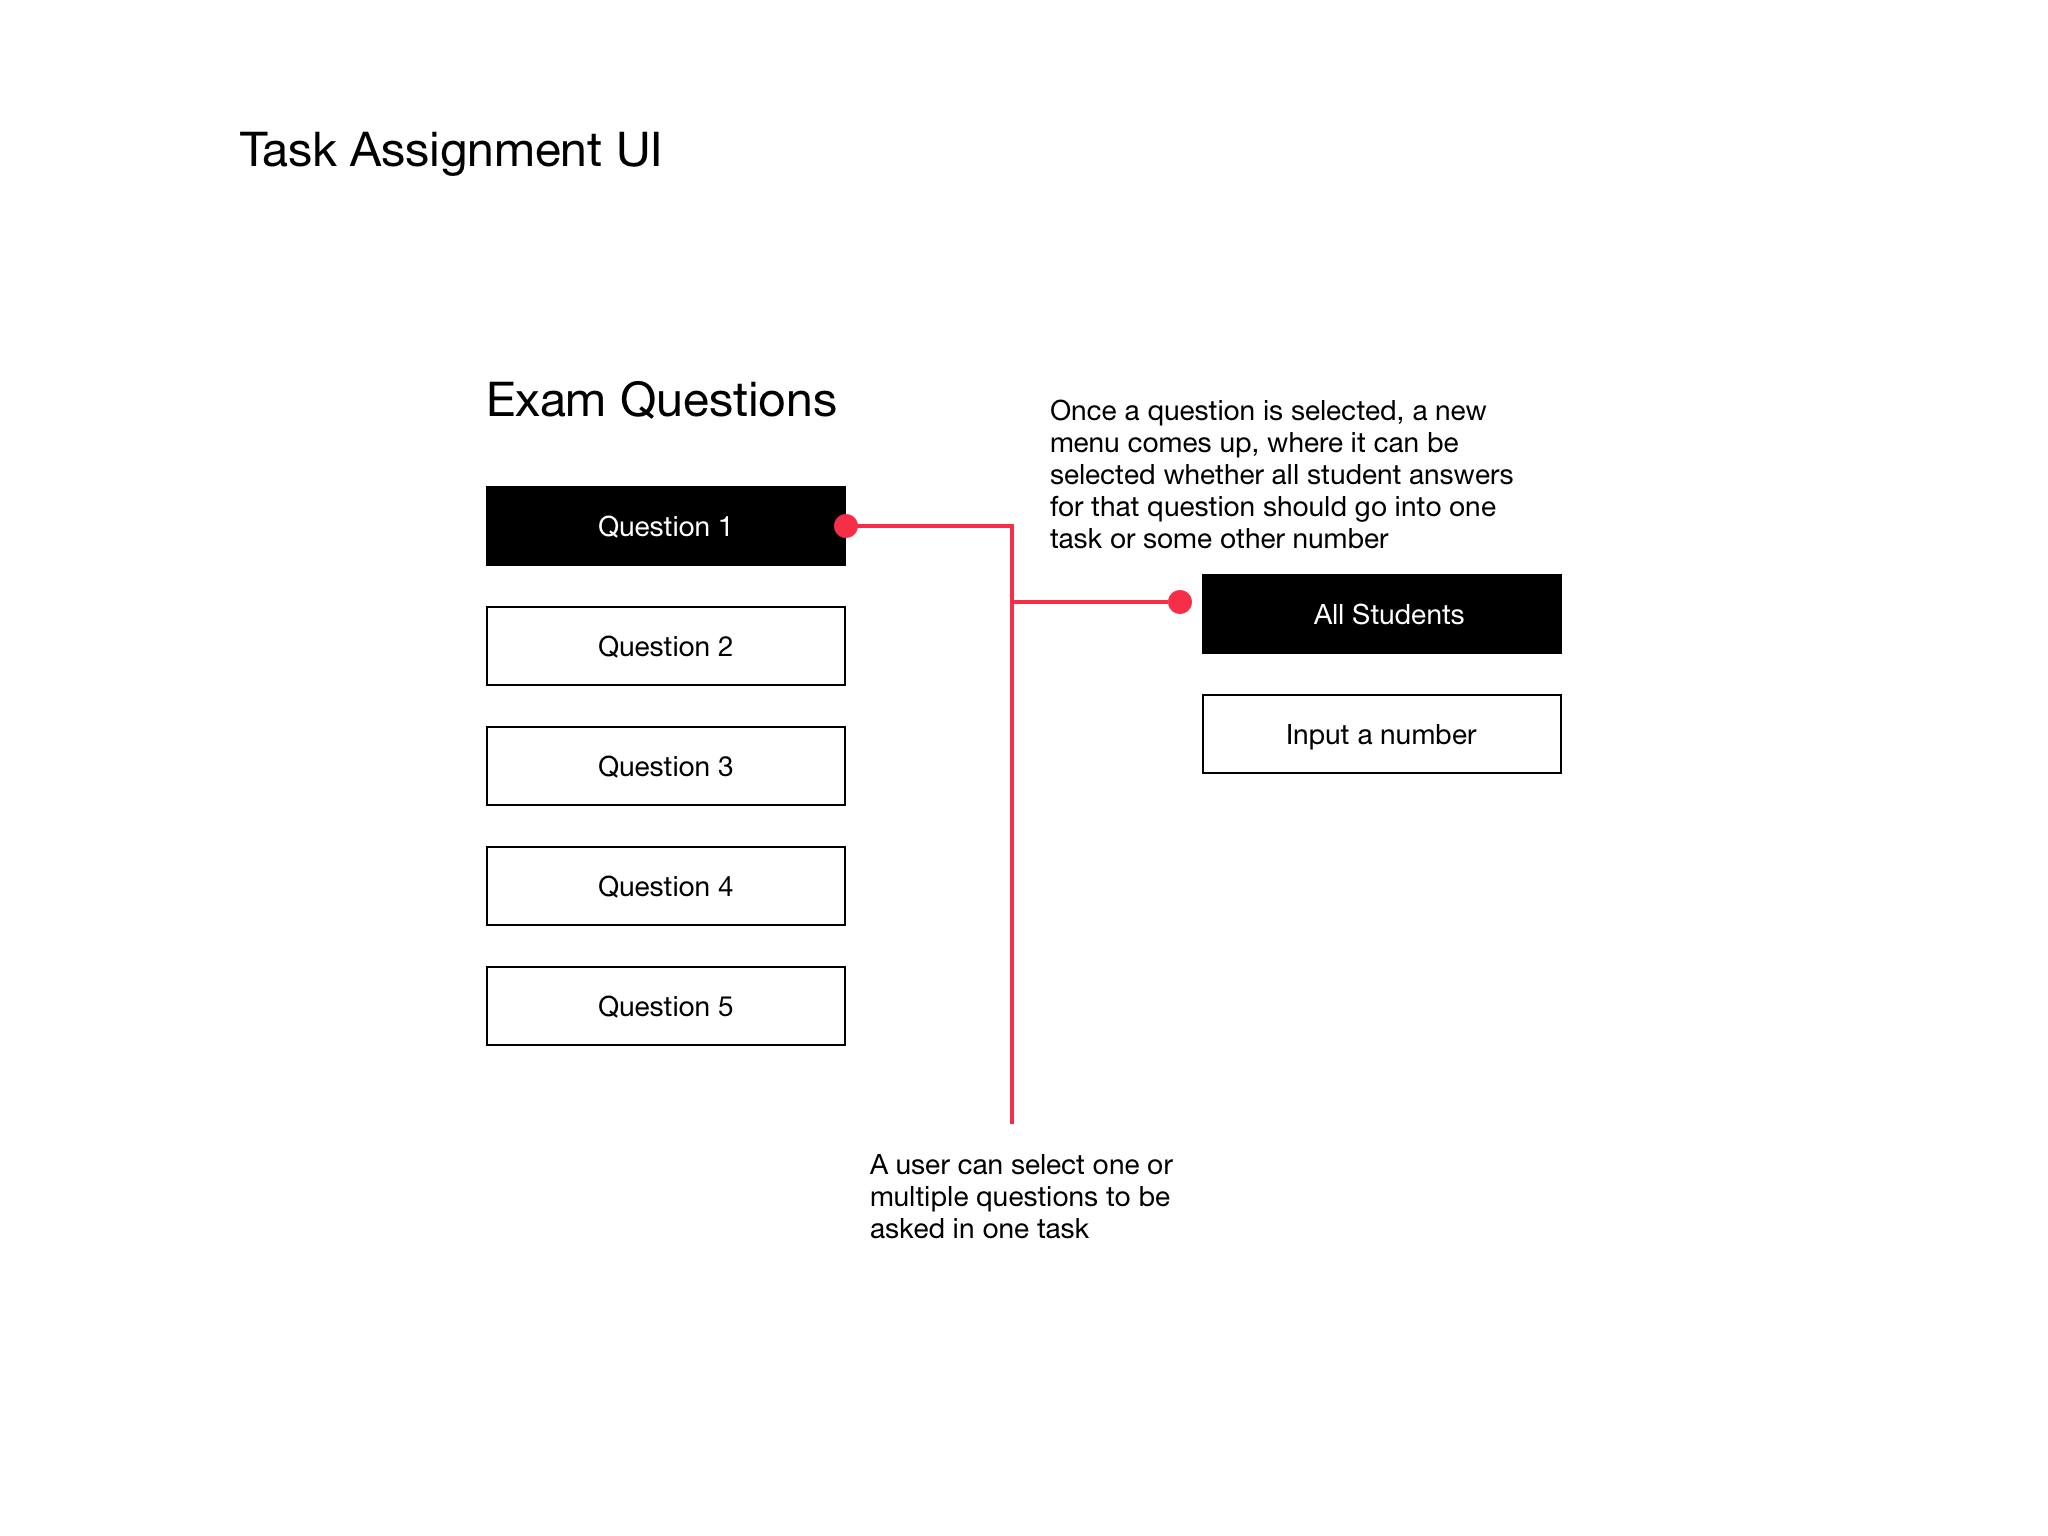 Image of a task assignment user interface